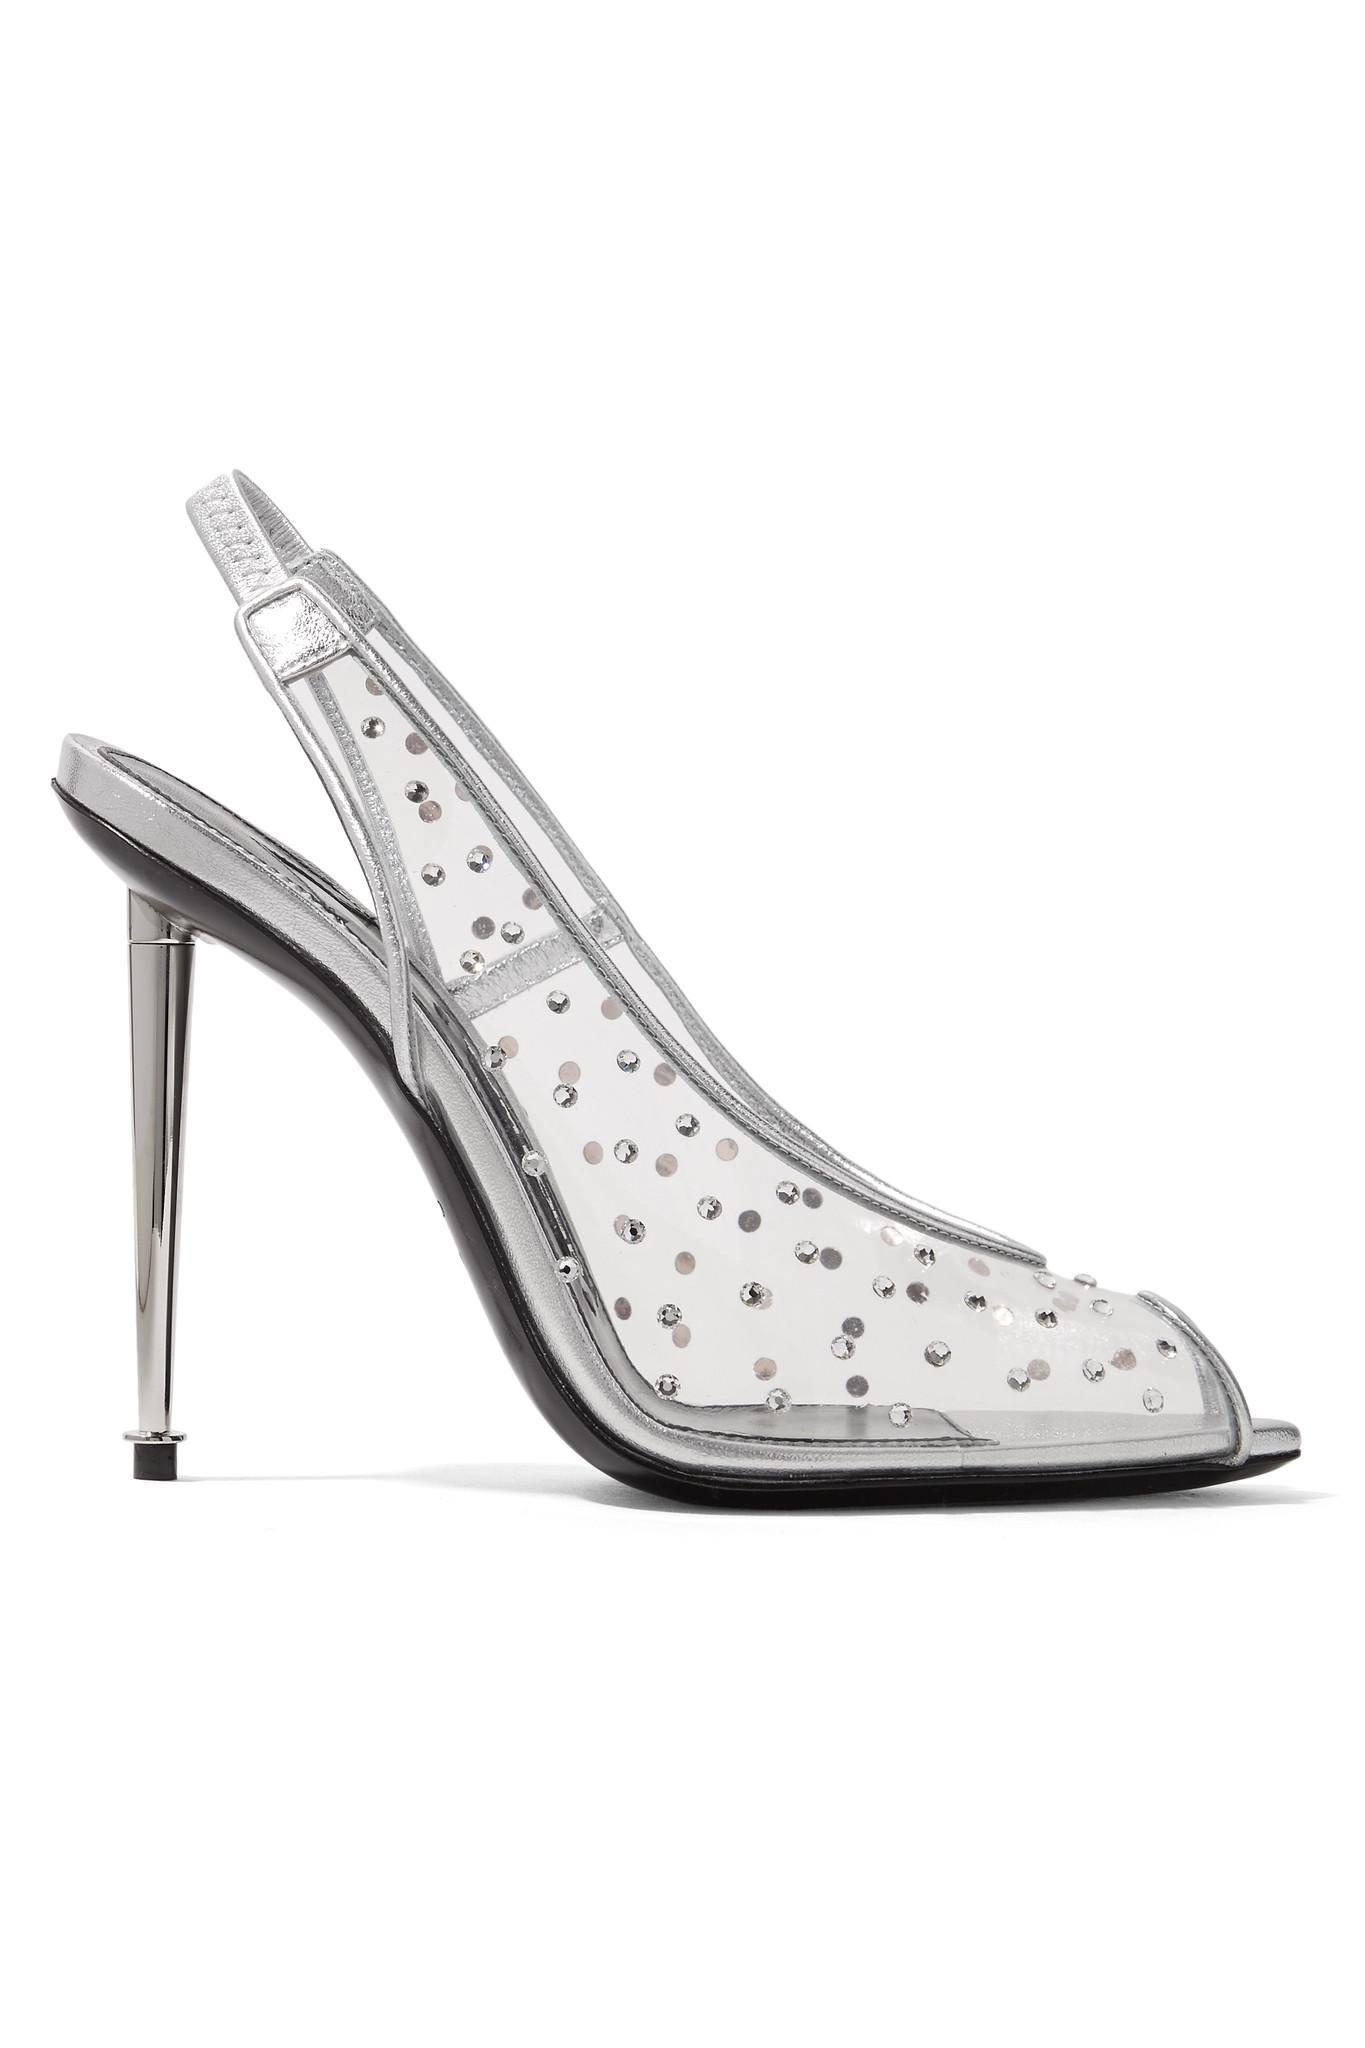 Tom Ford Embellished Pvc And Metallic Leather Slingback Pumps | Lyst